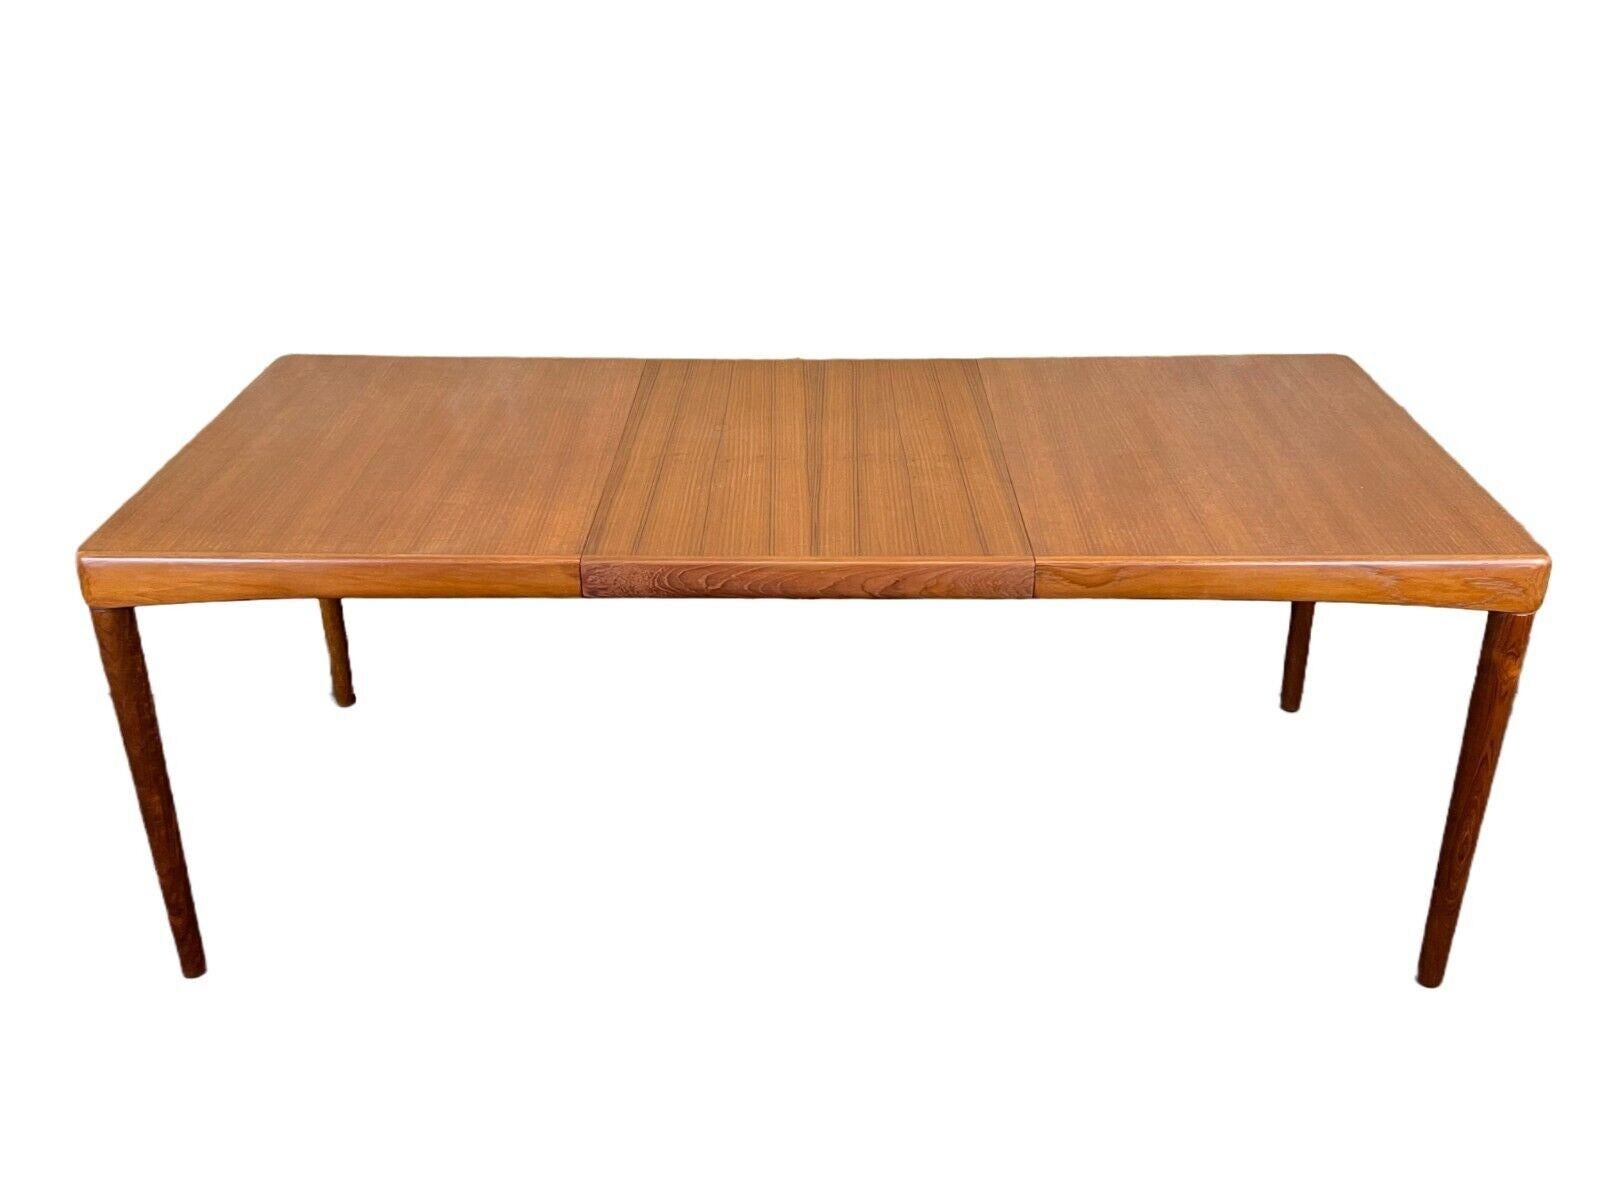 60s 70s teak dining table Dining Table H.W Klein for Bramin Danish Design

Object: dining table

Manufacturer: Bramin

Condition: good

Age: around 1960-1970

Dimensions:

Width = 195cm
Depth = 89.5cm
Height = 71.5cm
Insert plate = 60cm

Other